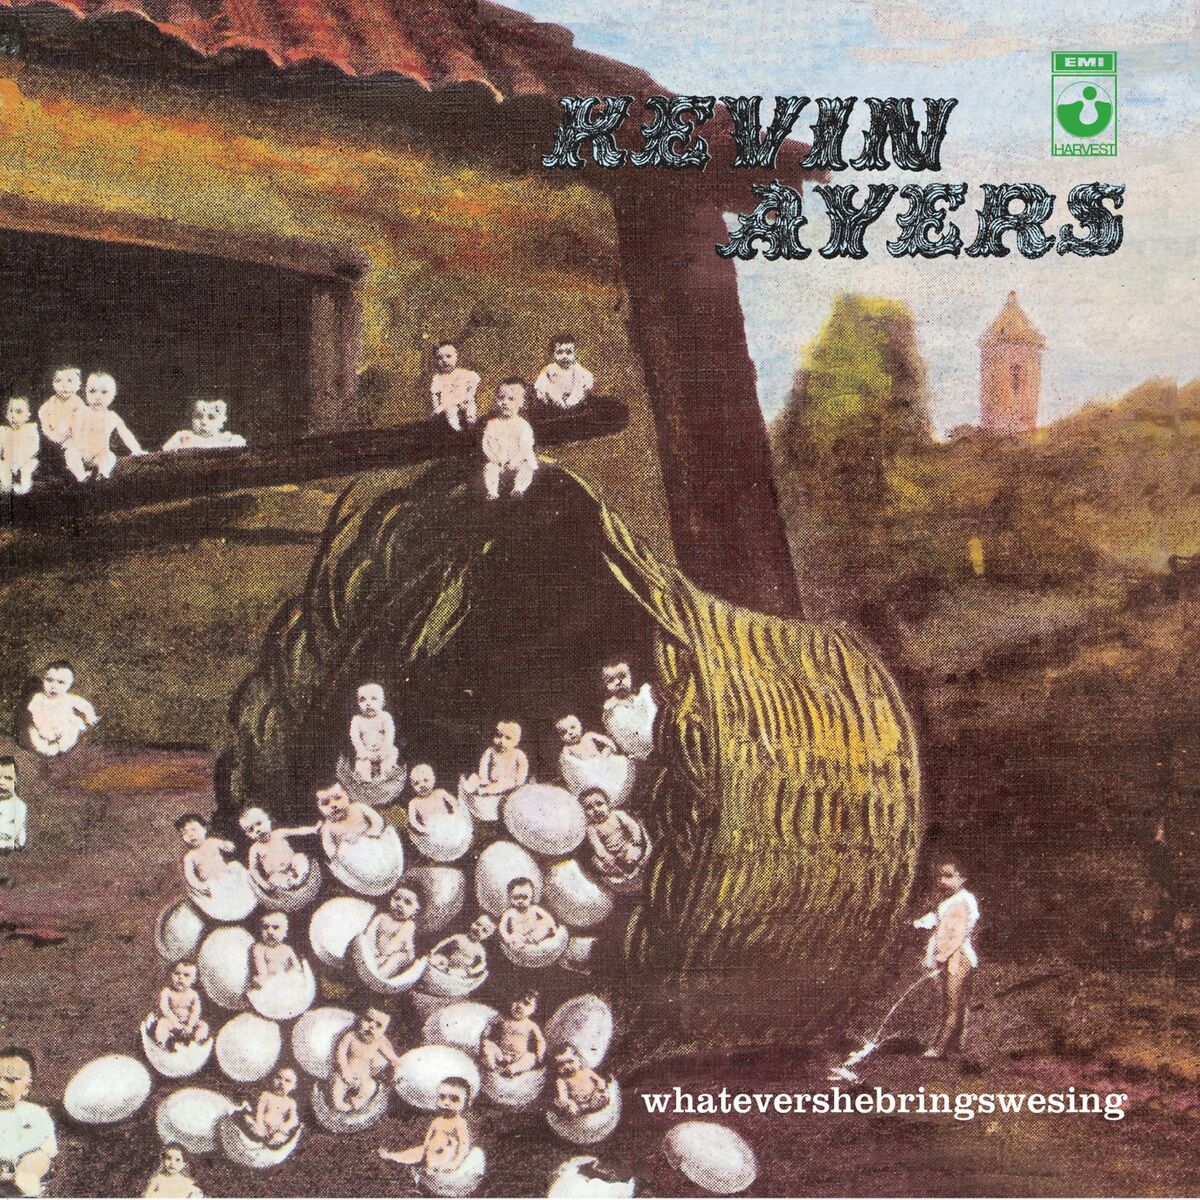 Kevin Ayers: album